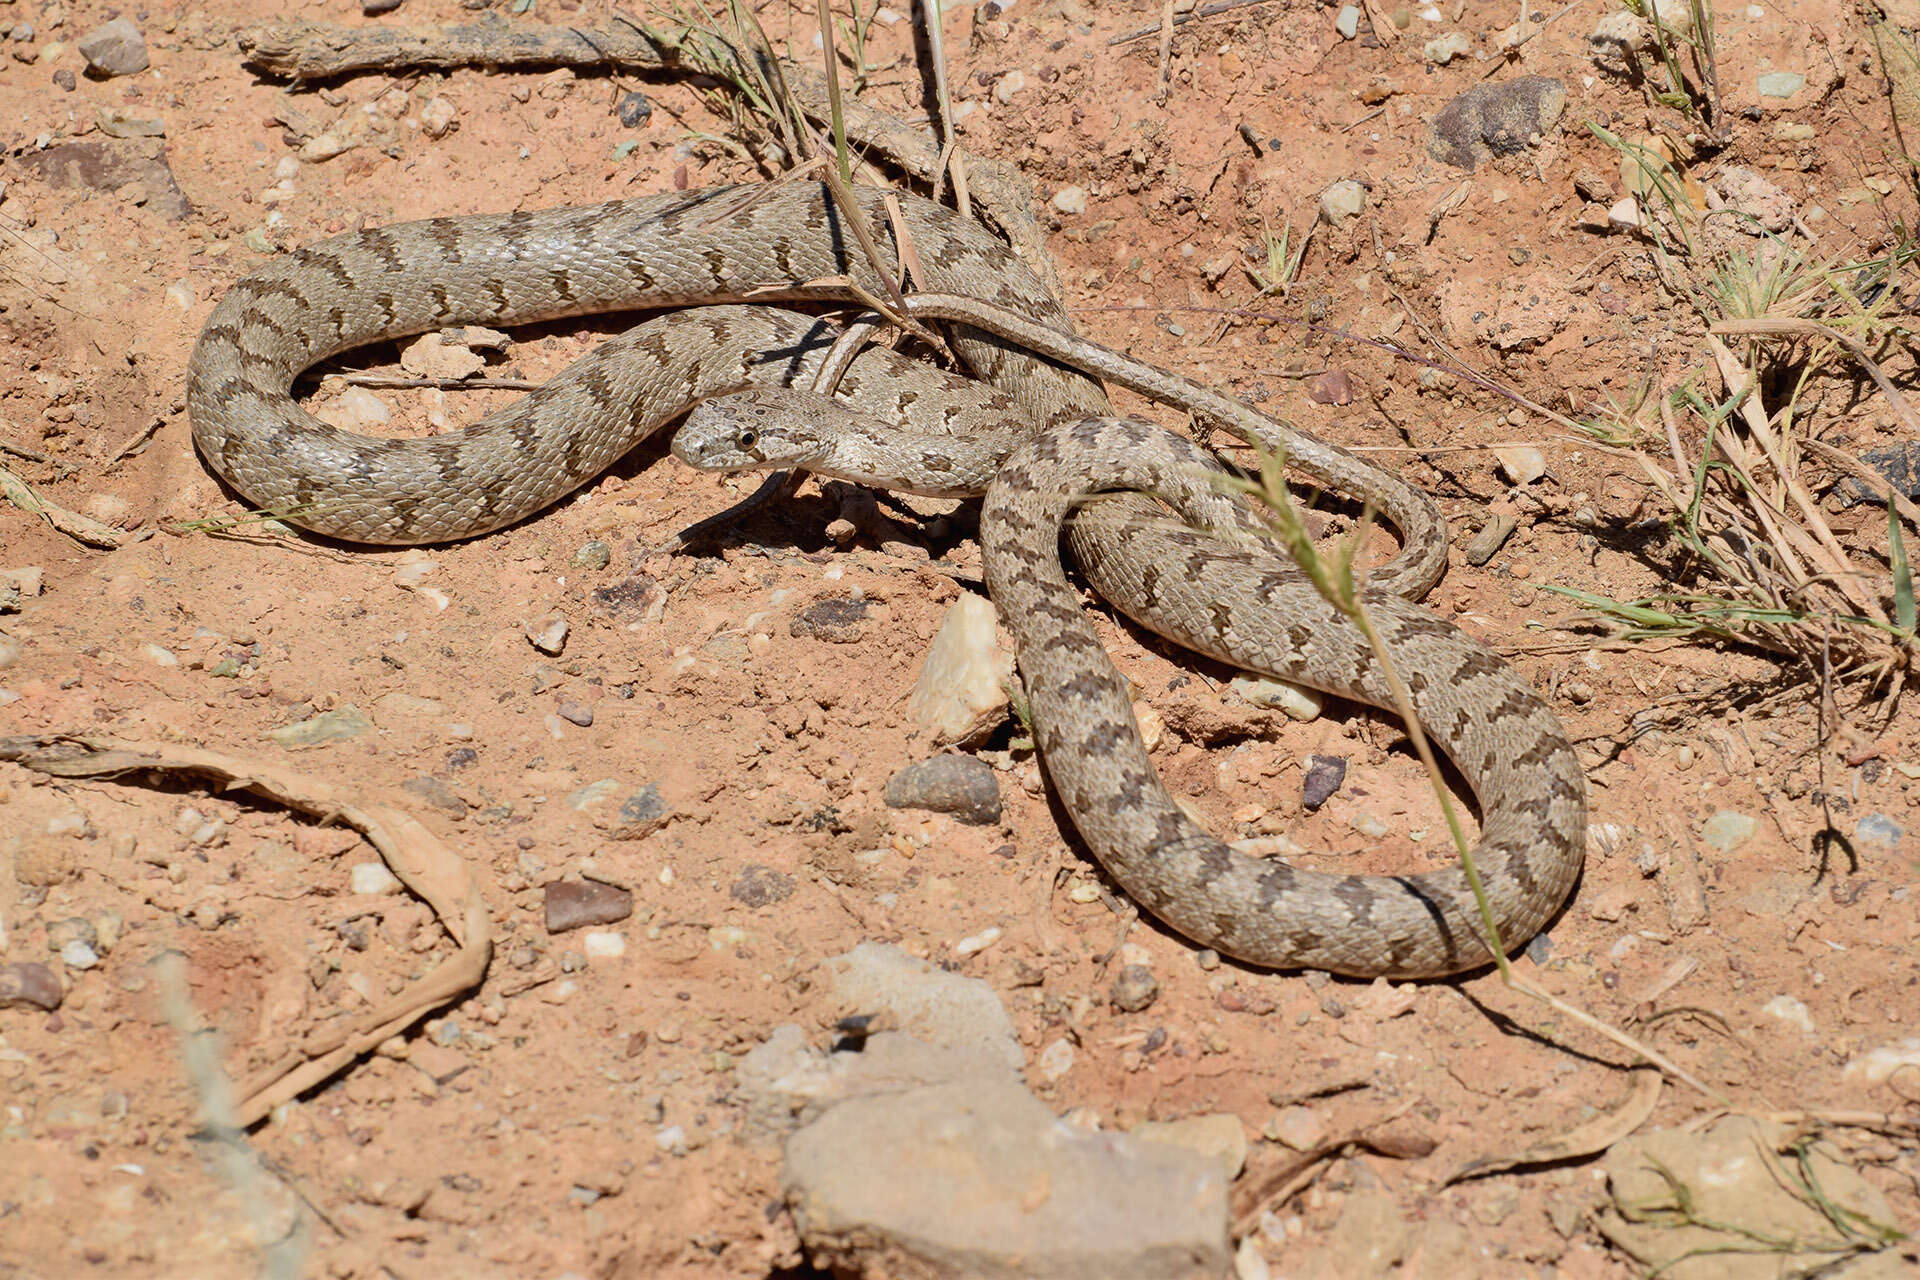 Image of Spotted Wipe Snake